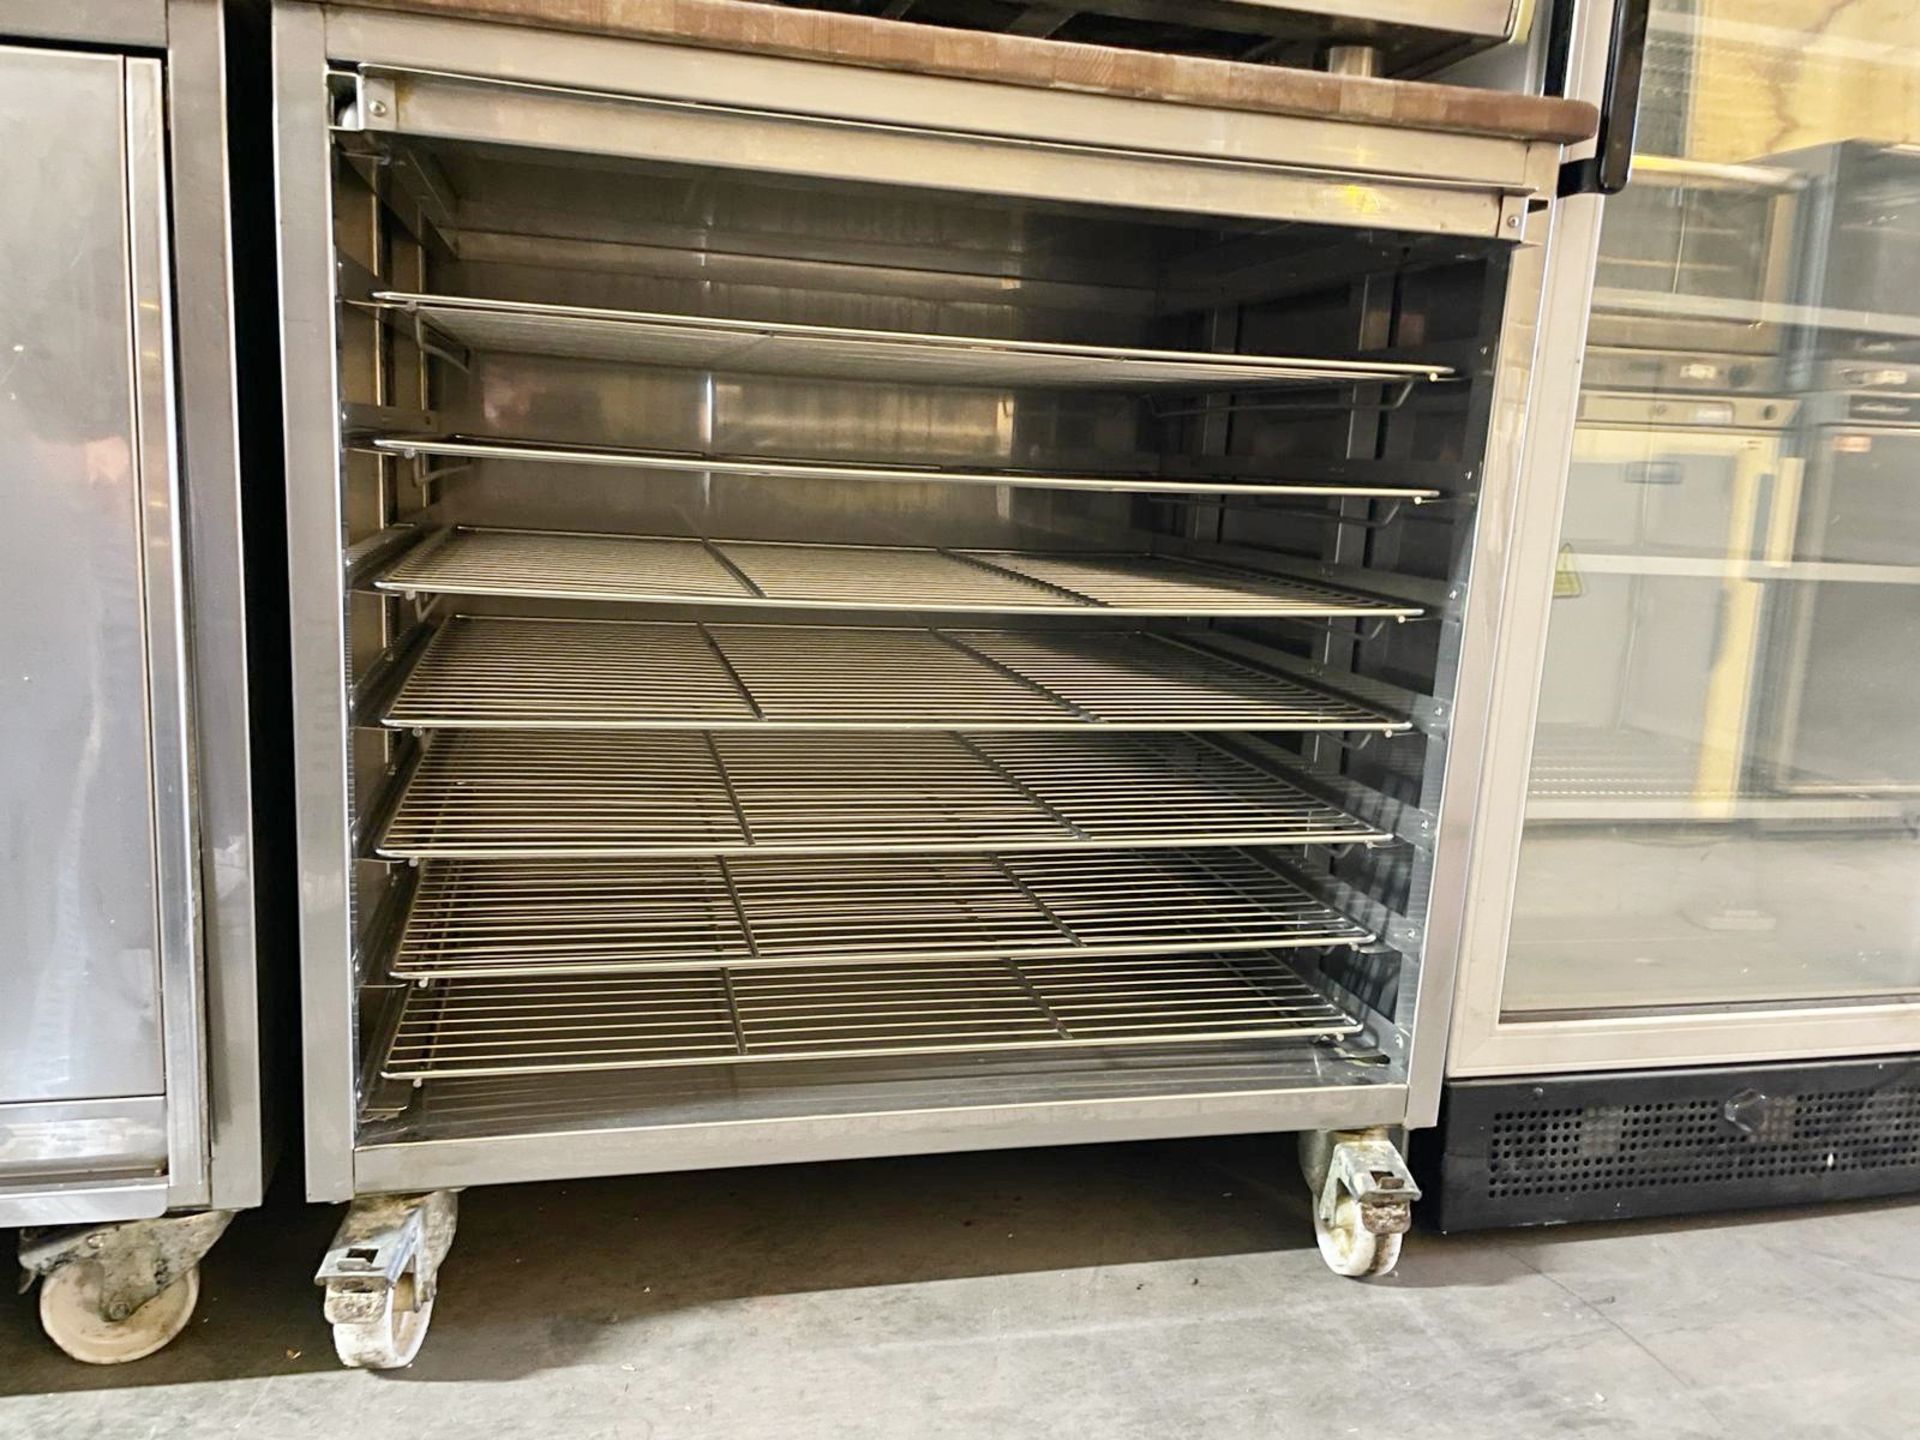 1 x Mobile Stainless Steel Prep Cabinet With Seven Removable Wire Shelves, Sliding Door & Wooden Top - Image 7 of 7